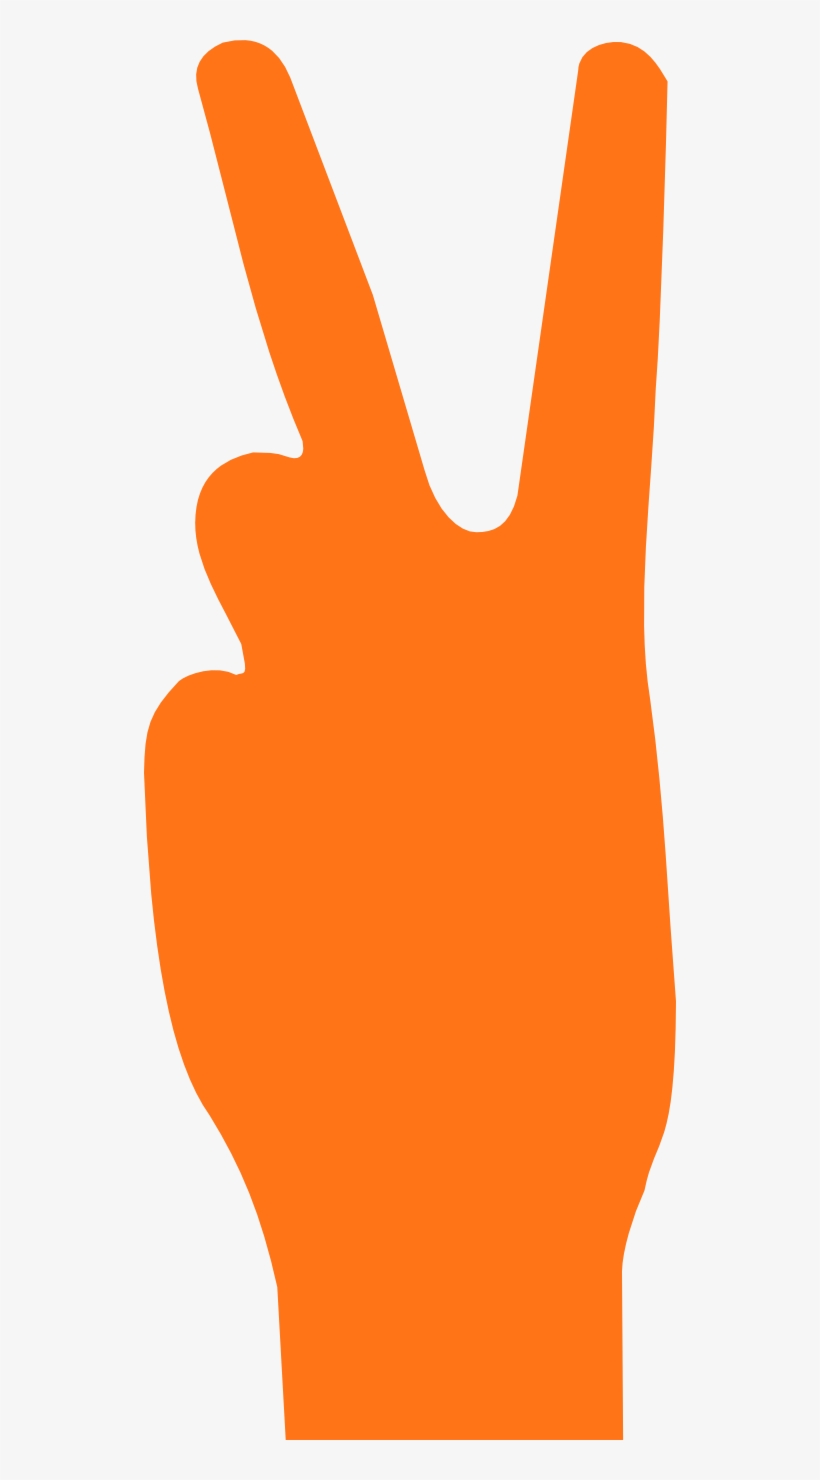 Pumpkin V Sign Peace Svg Scalable Vector Graphics Scallywag - Peace Orange, transparent png #486440